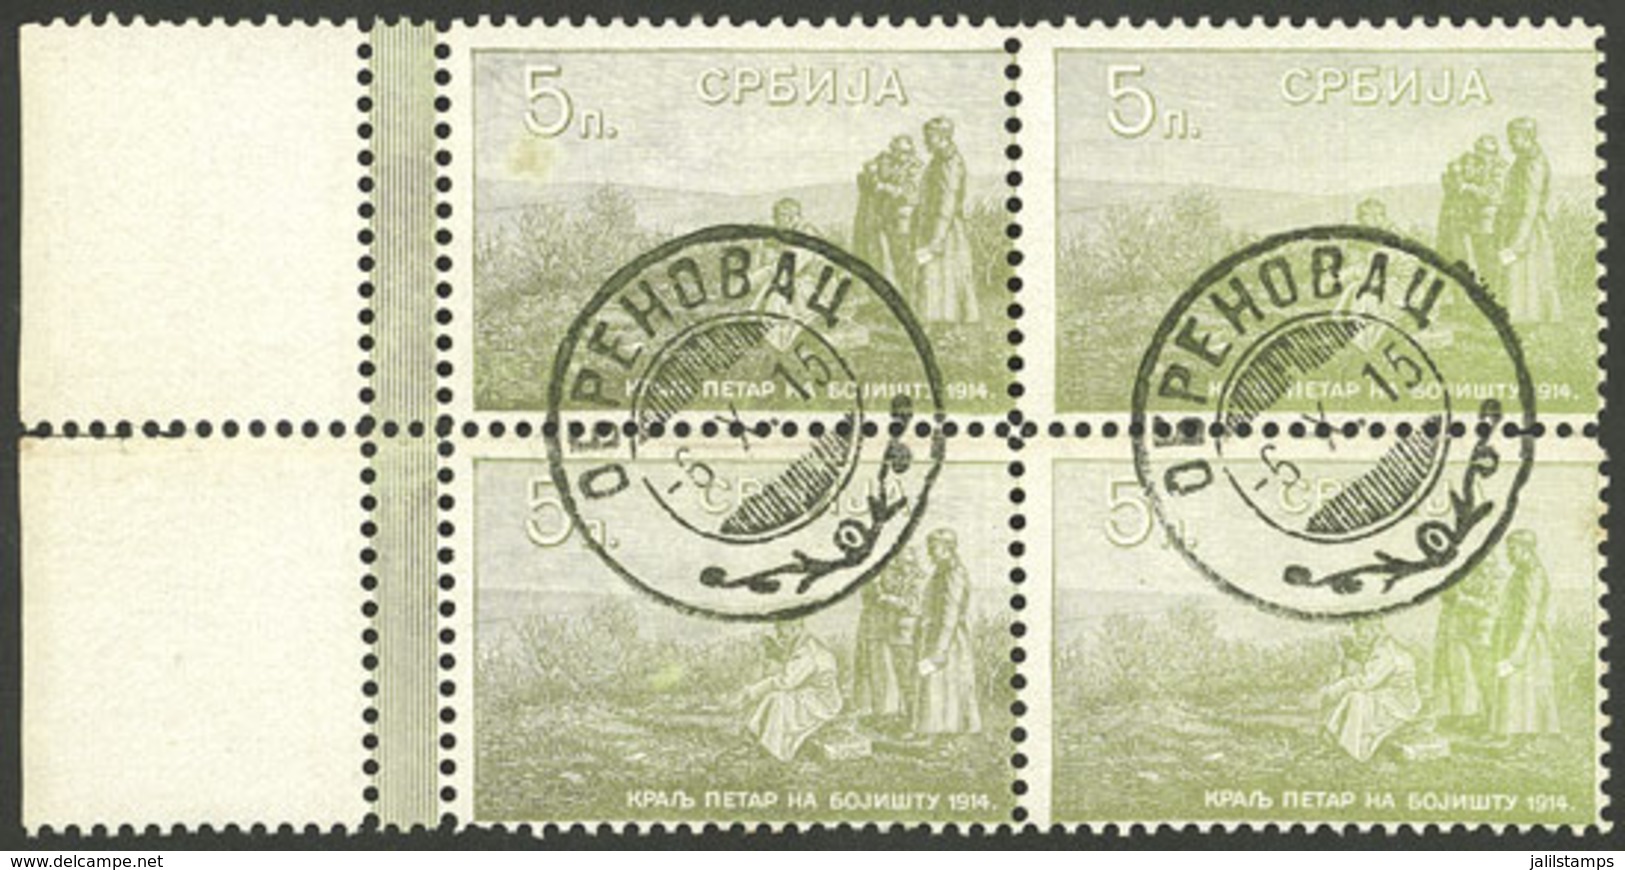 SERBIA: Attractive Block Of 4 With Double Perforation At Left And Cancel Of 1915, VF Quality! - Serbien